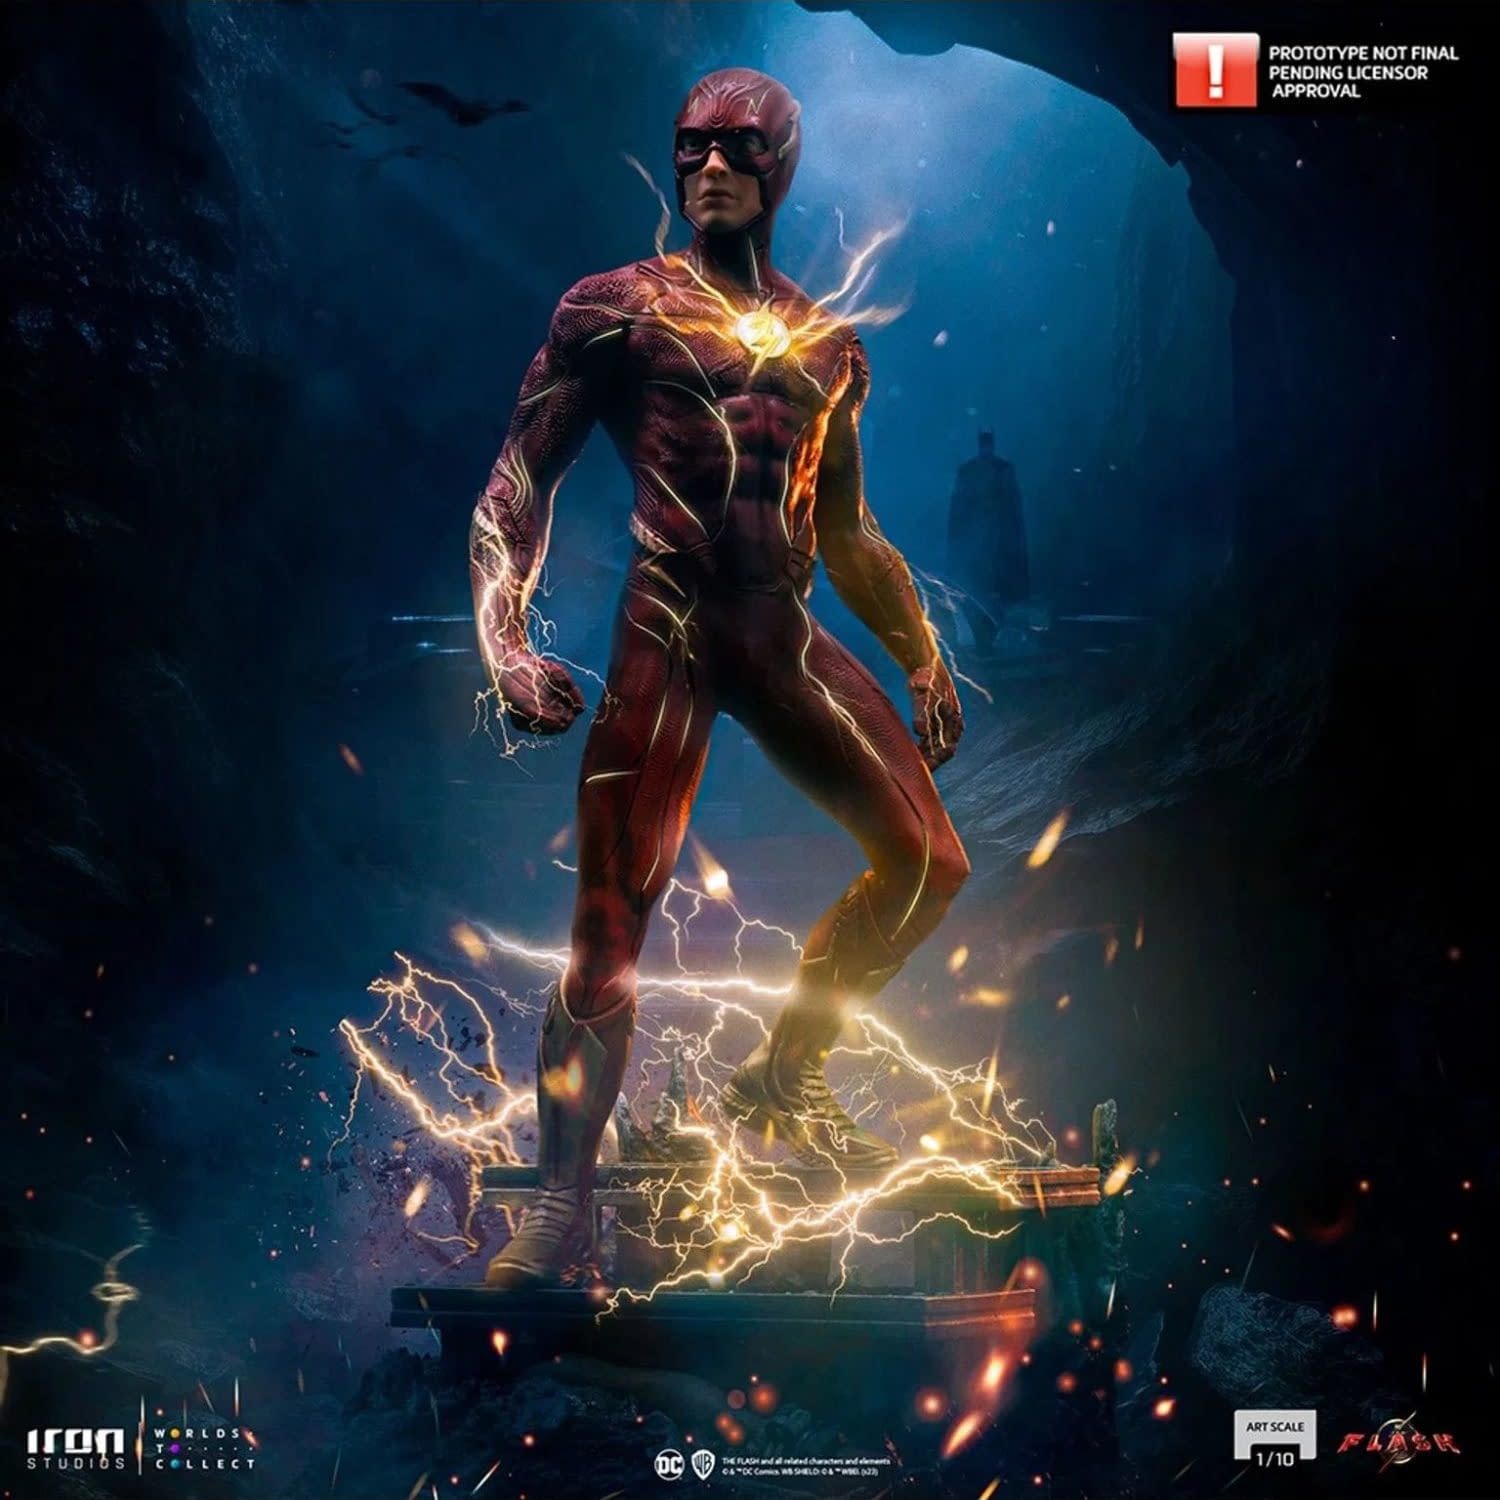 The Flash Races On Into Iron Studios with a New DC Universe Statue